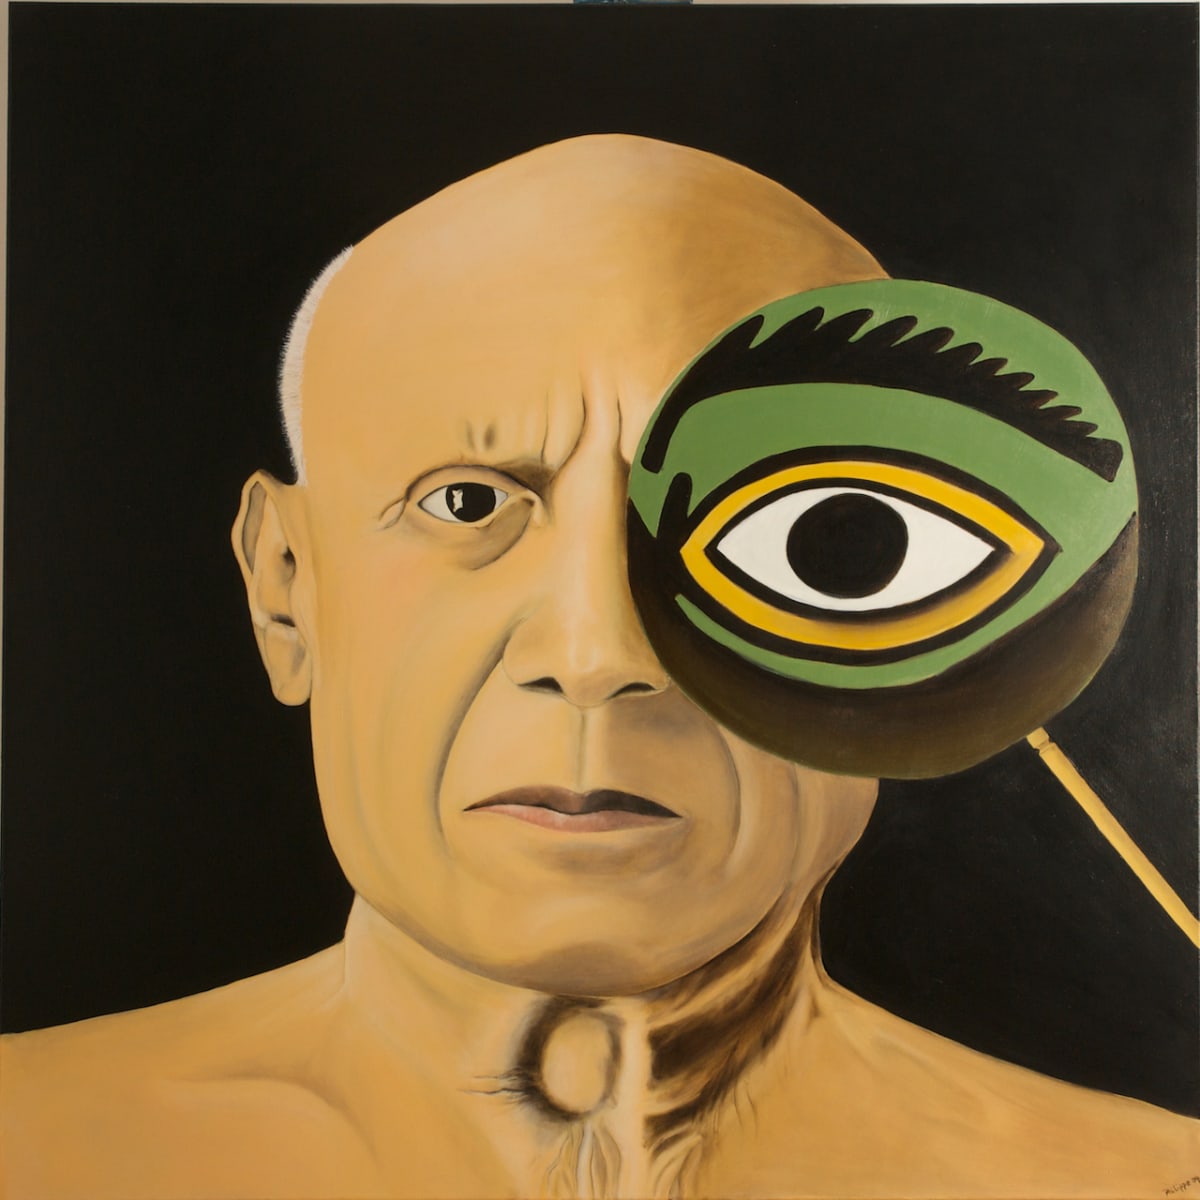 L'OEIL DU MAITRE / THE MASTER'S EYE by Philippe Walker  Image: A PORTRAIT OF PICASSO BRINGING TOGETHER ONE OF HIS COMPOSITION TO REPLACE HIS OWN EYE